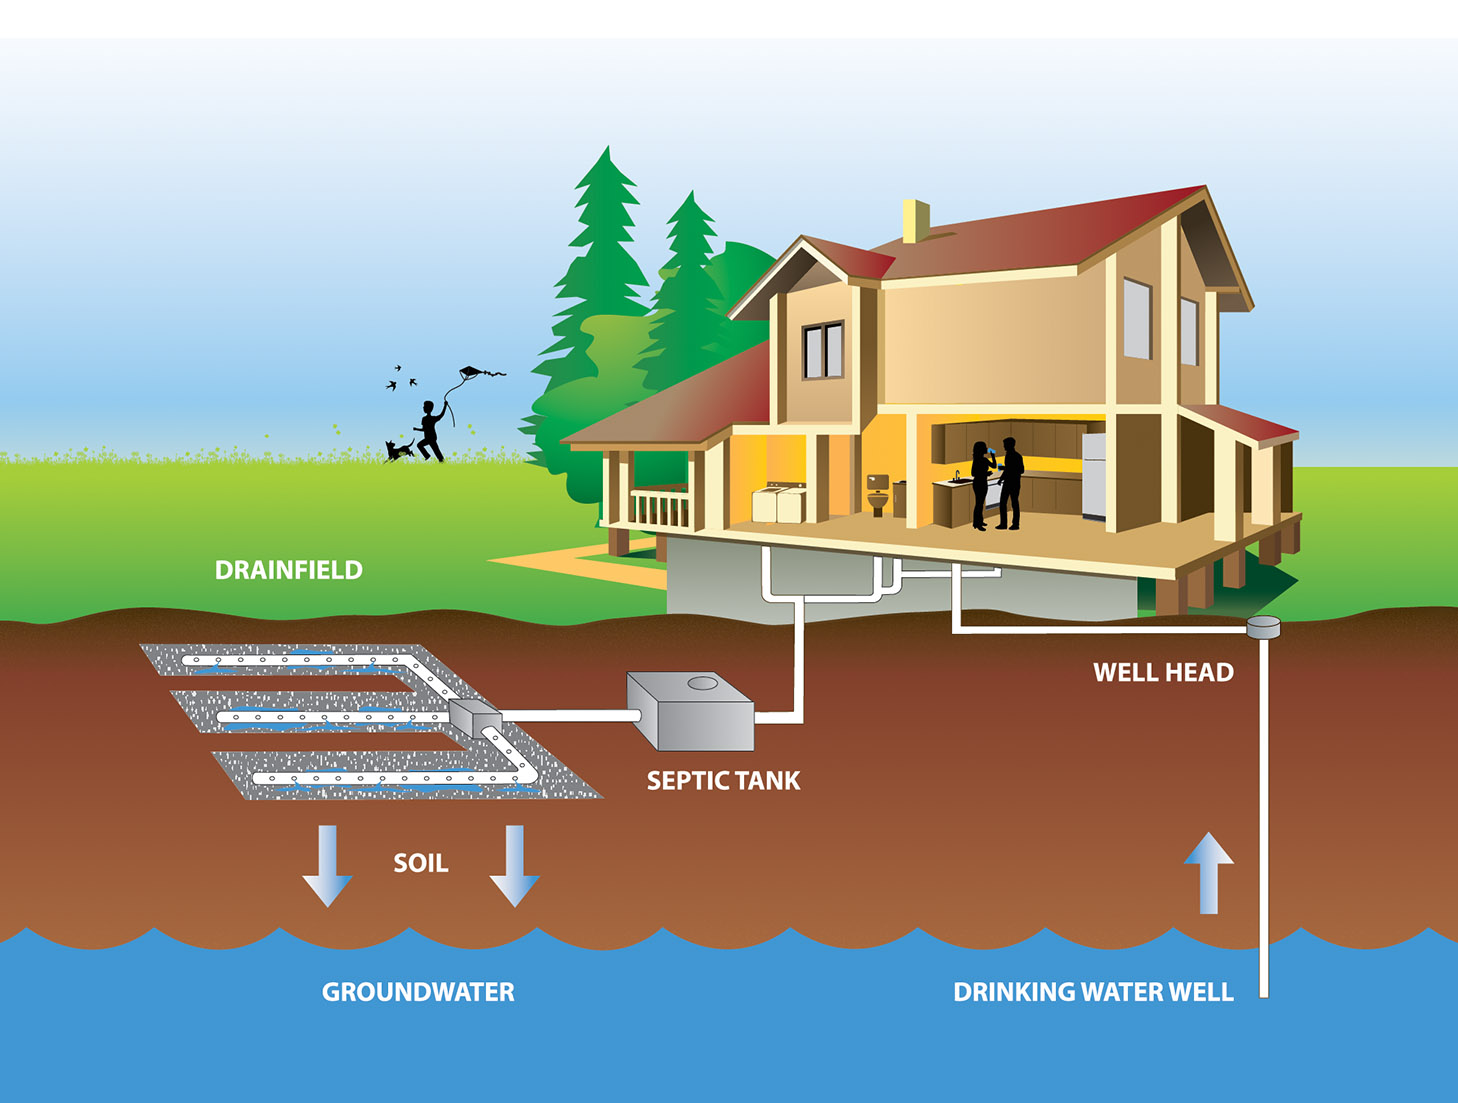 What is a Septic System?